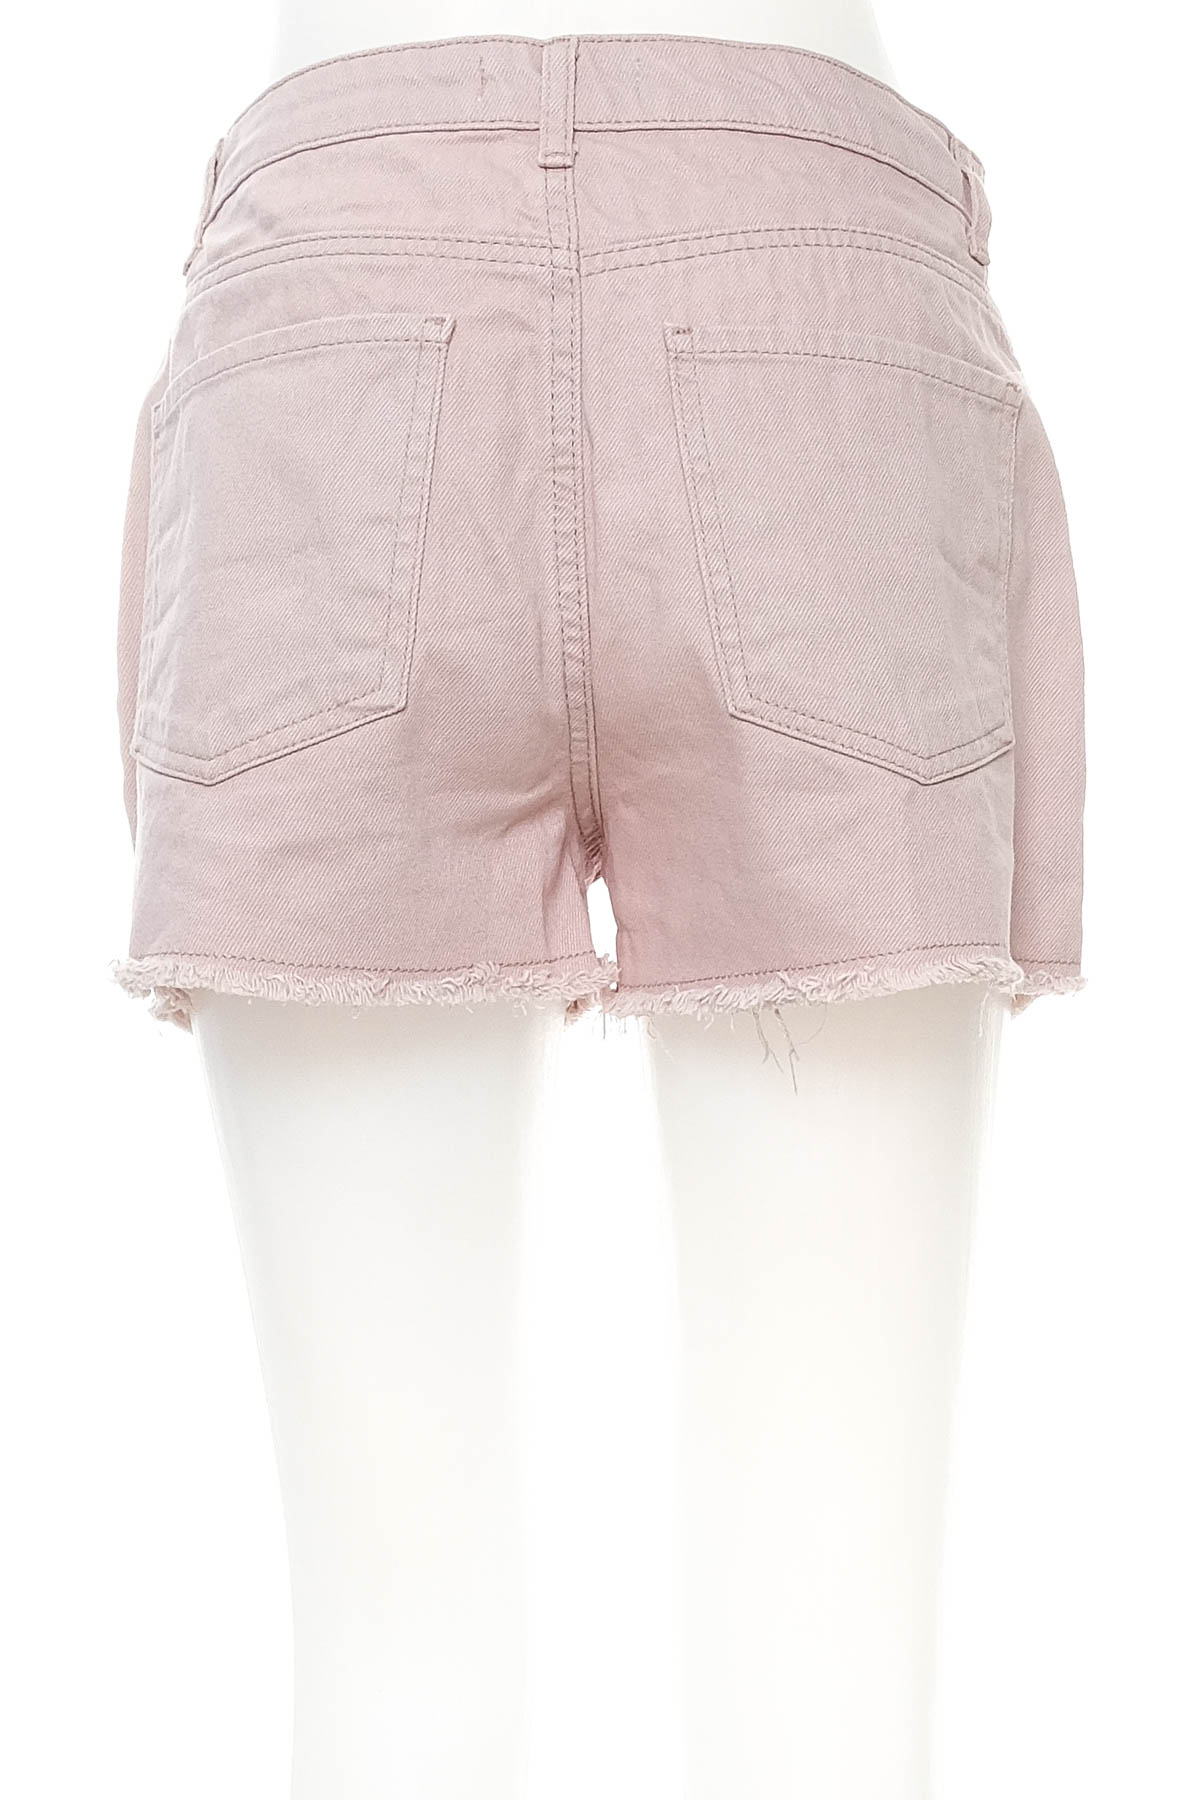 Female shorts - LCW Jeans - 1